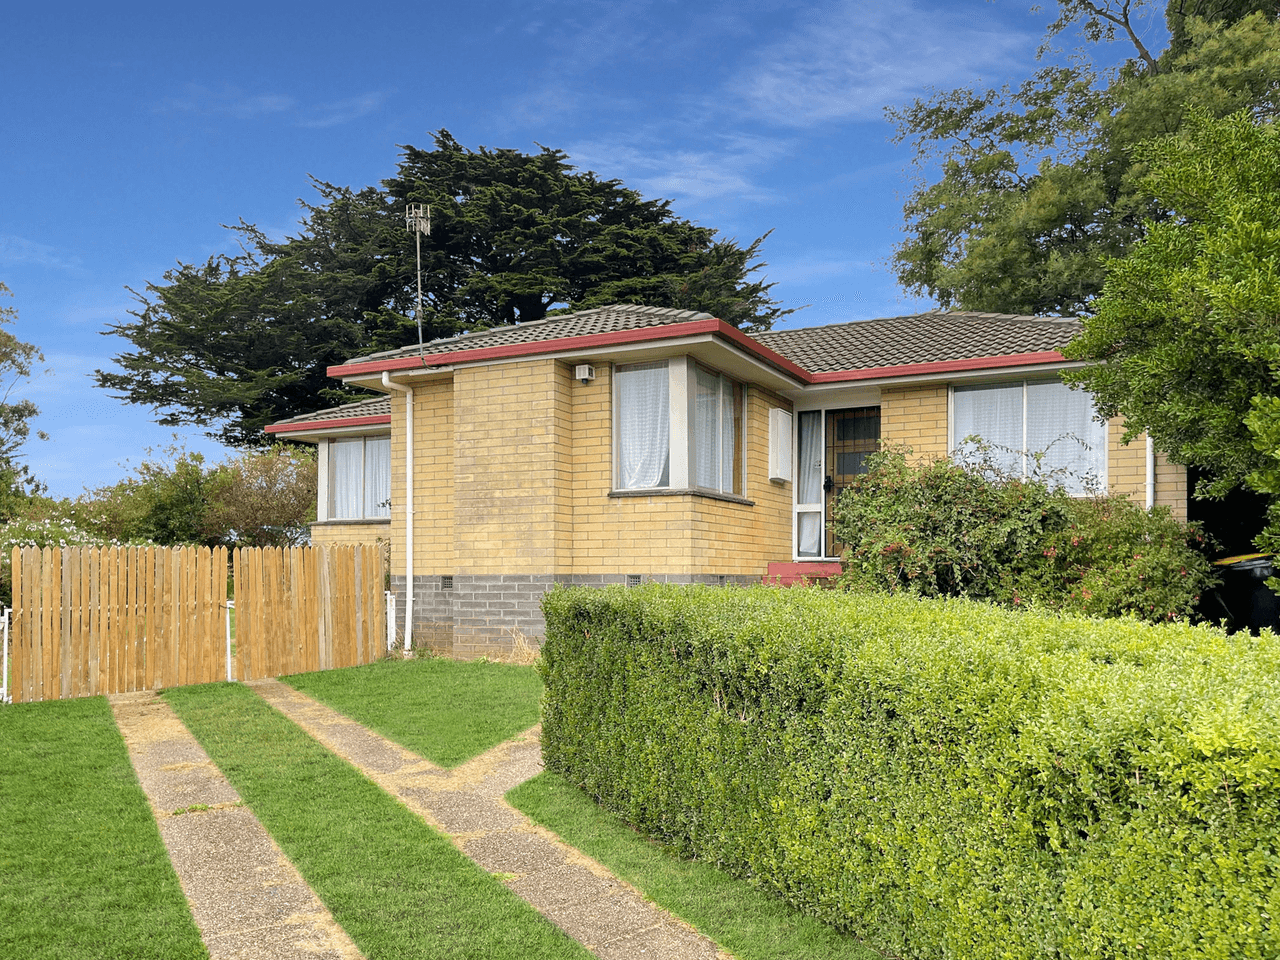 53 Loongana Ave, SHOREWELL PARK, TAS 7320